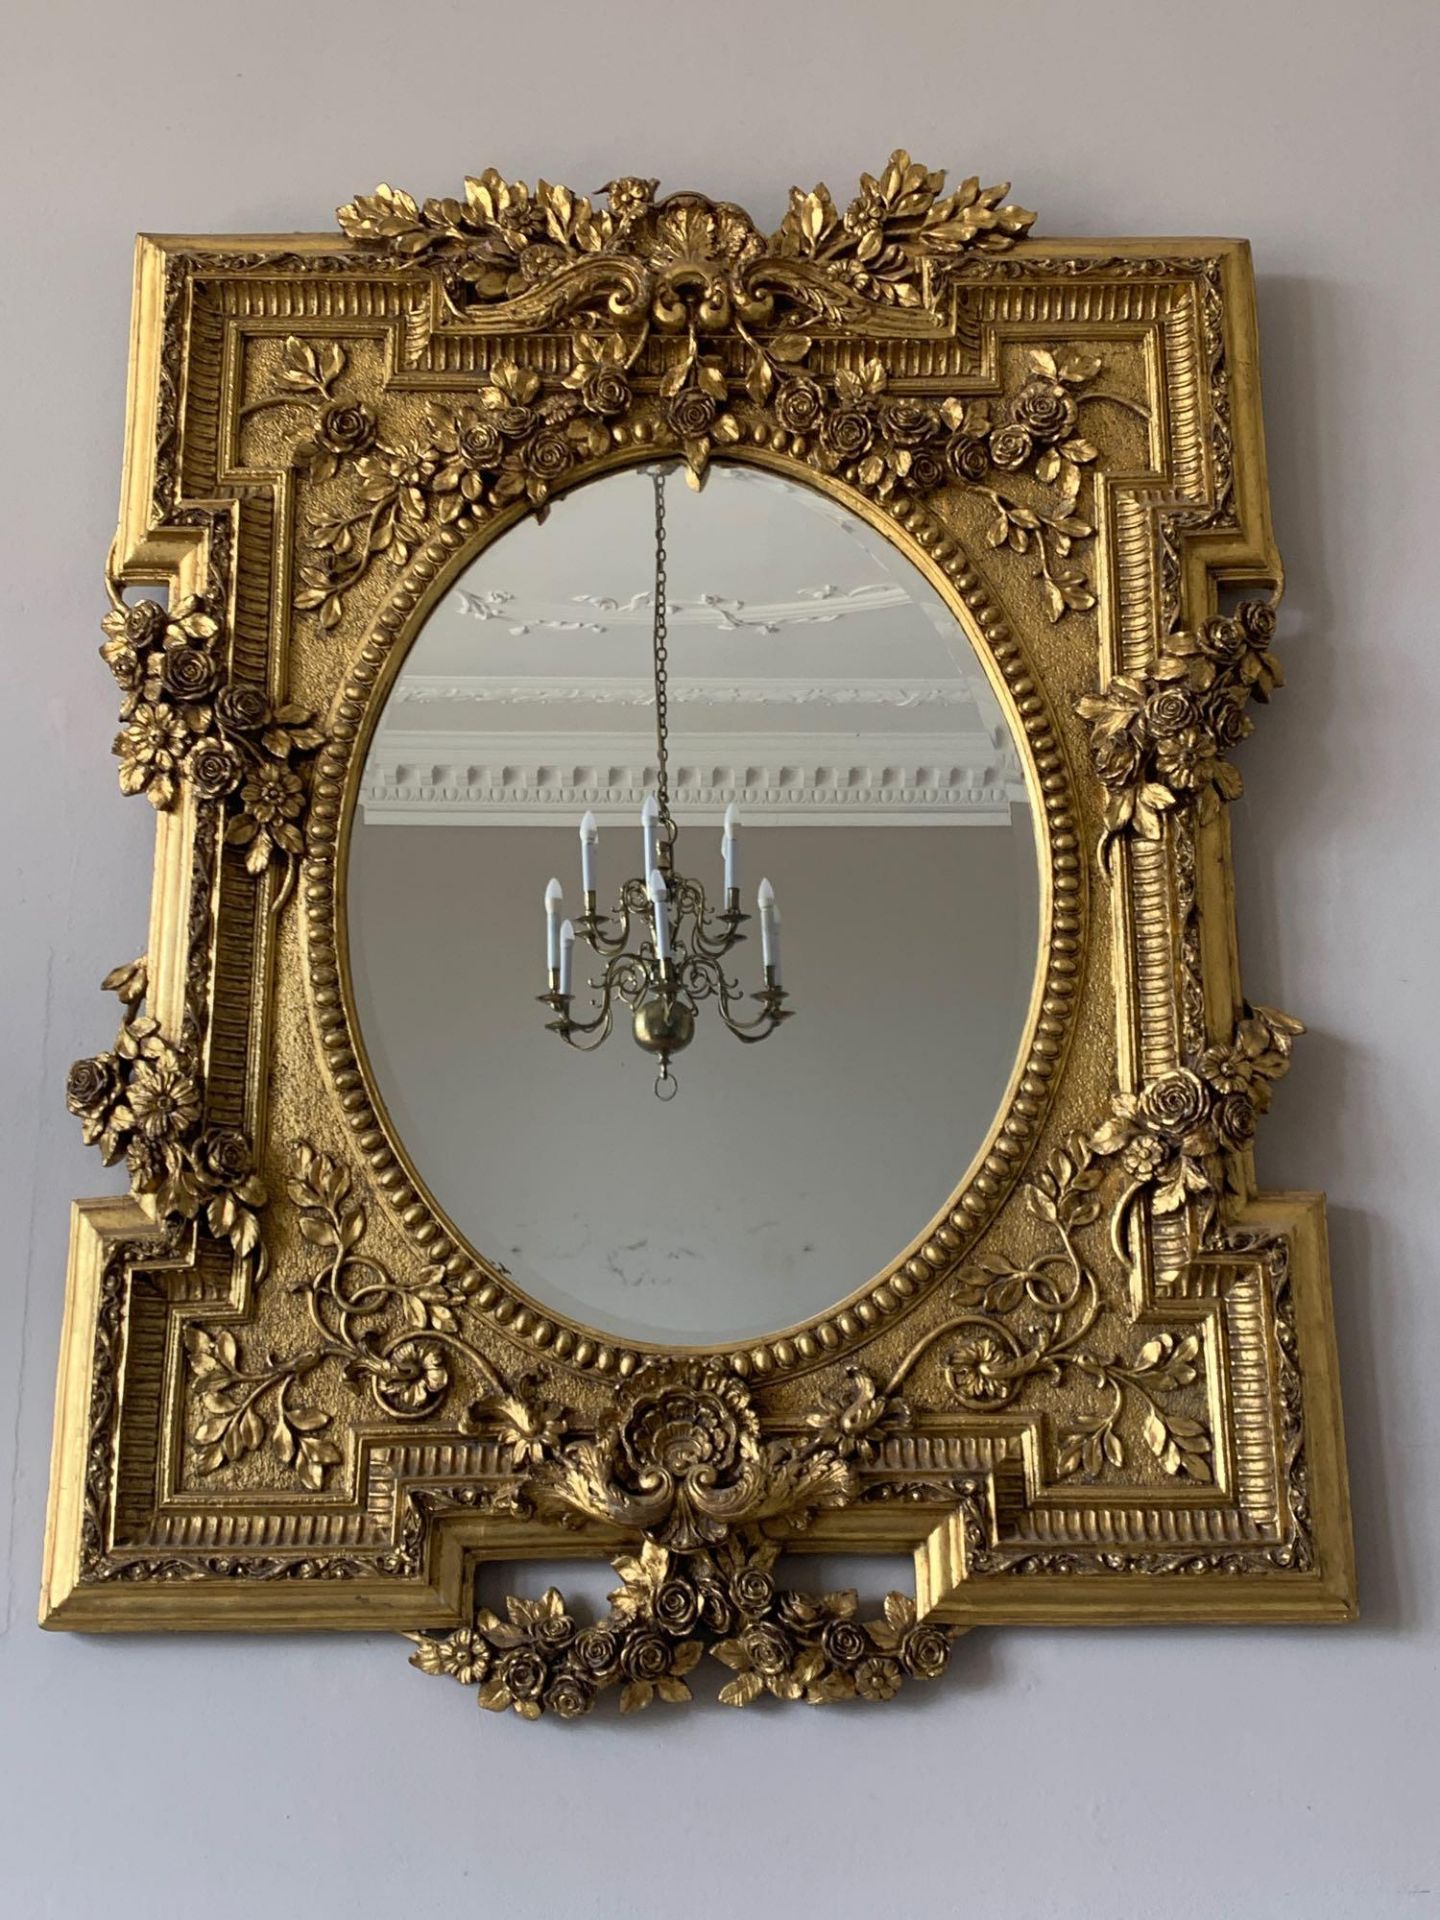 Gilded Over Mantle Mirror 135 x 100cm - Image 2 of 2